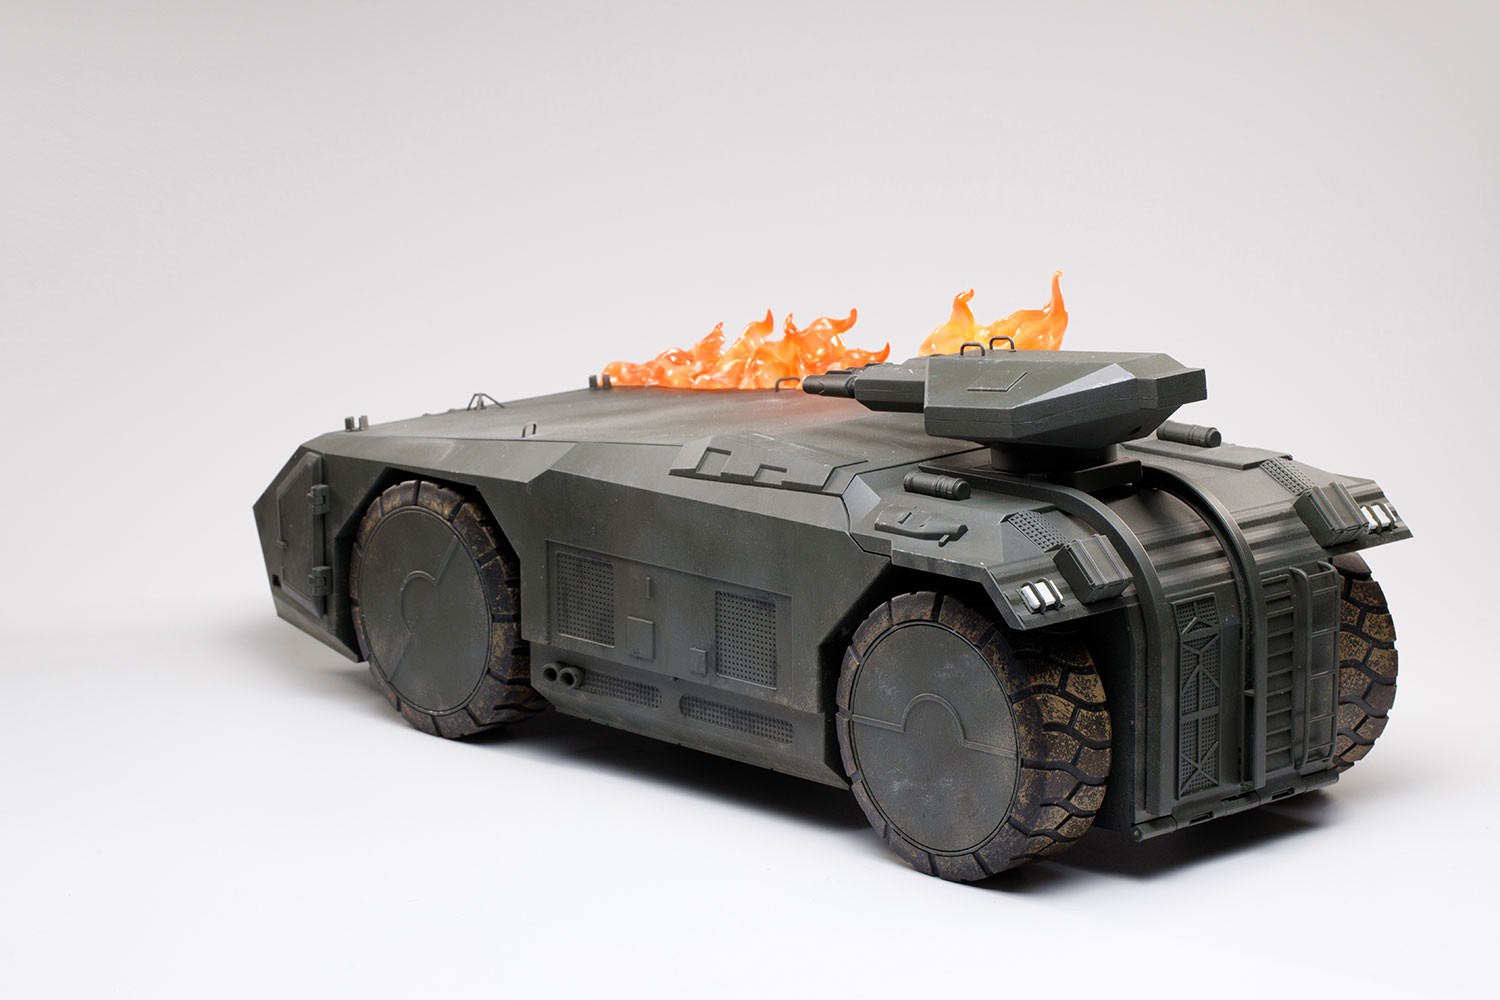 Burning Armored Personnel Carrier (Prototype Shown) View 7